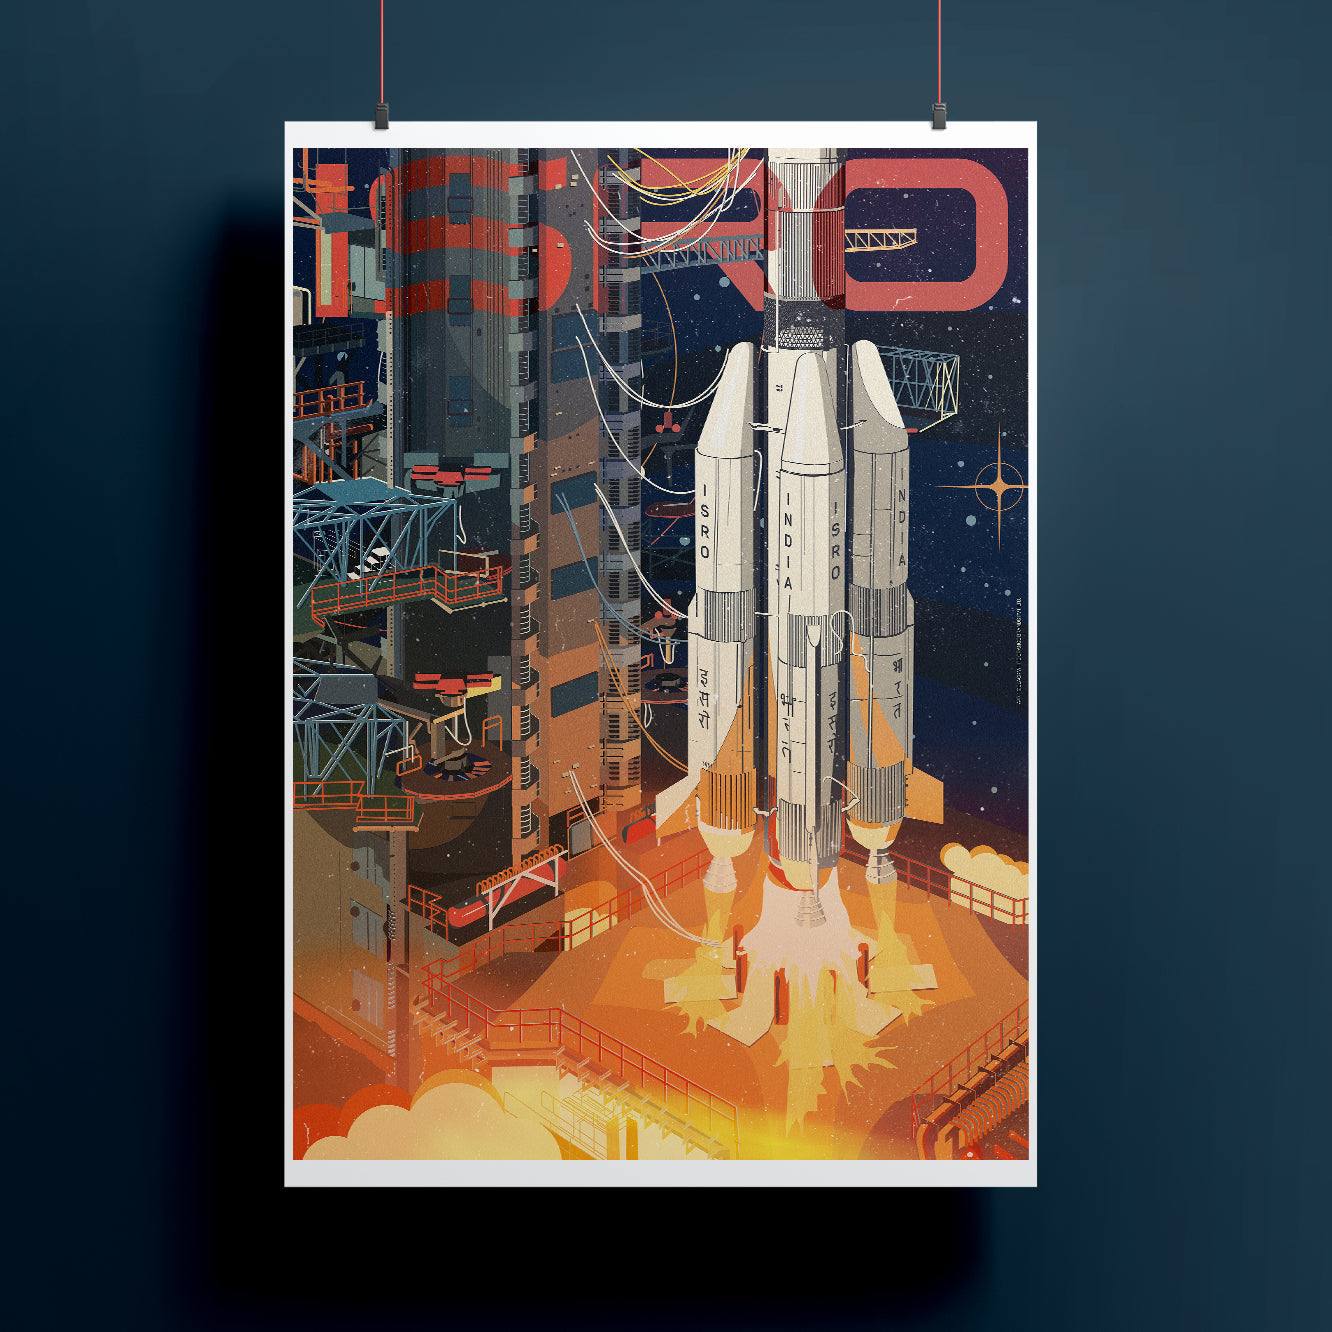 Night launch GSLV MKII Poster -A47 - India - www.superherotoystore.com